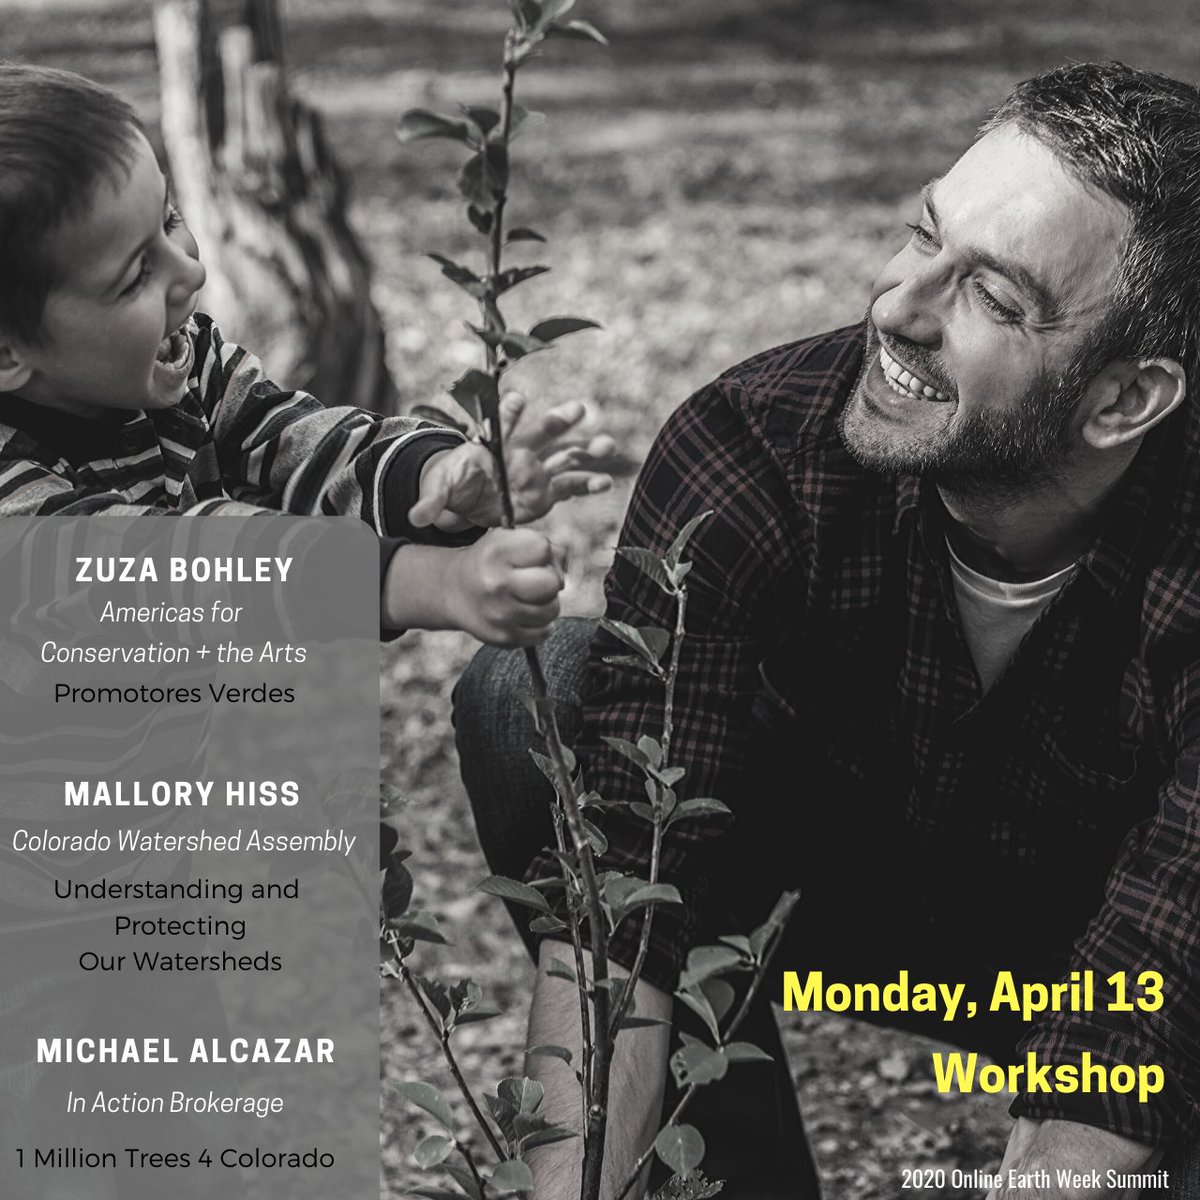 Happy Monday and  #earthweeksummit! Join us today at 12pm EST for our exciting lineup featuring: Zuza Bohley on building authentic leadership  Mallory Hiss from  @COWatershed on understanding watersheds  Michael Alcazar on planting 1 million trees in Colorado⁠